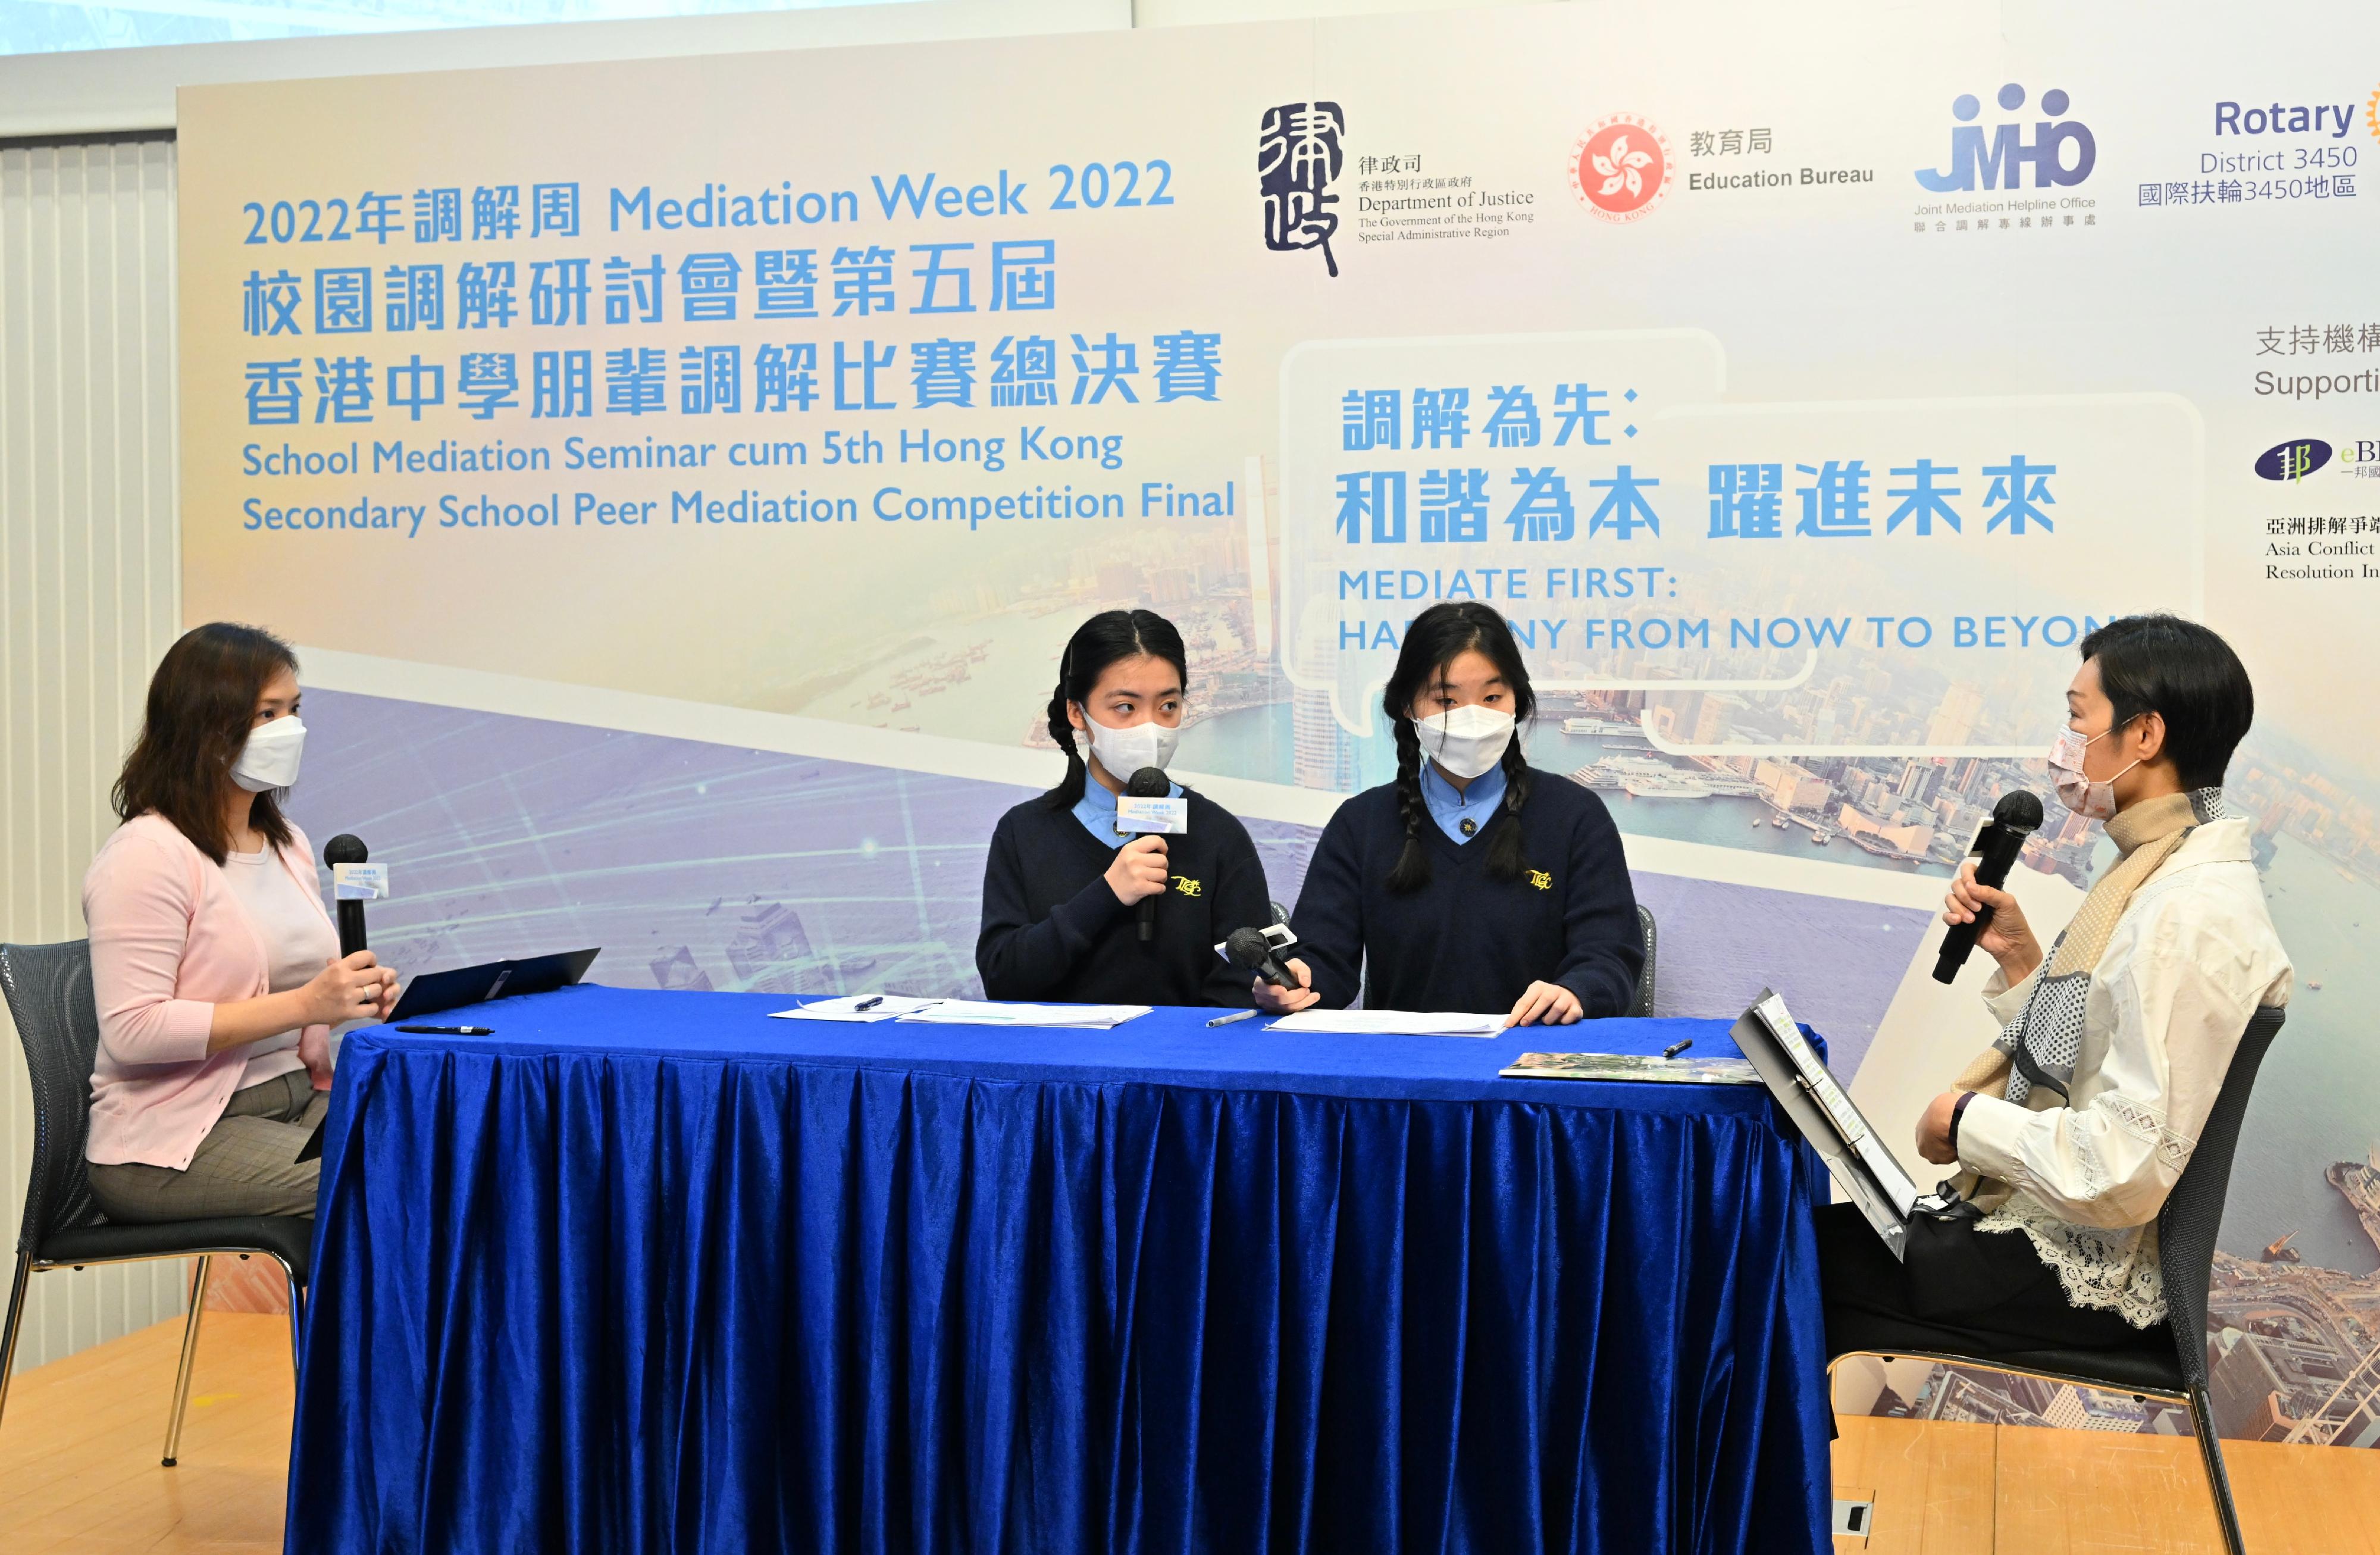 20220503 – The 5th Hong Kong Secondary School Peer Mediation Competition (2021-2022)